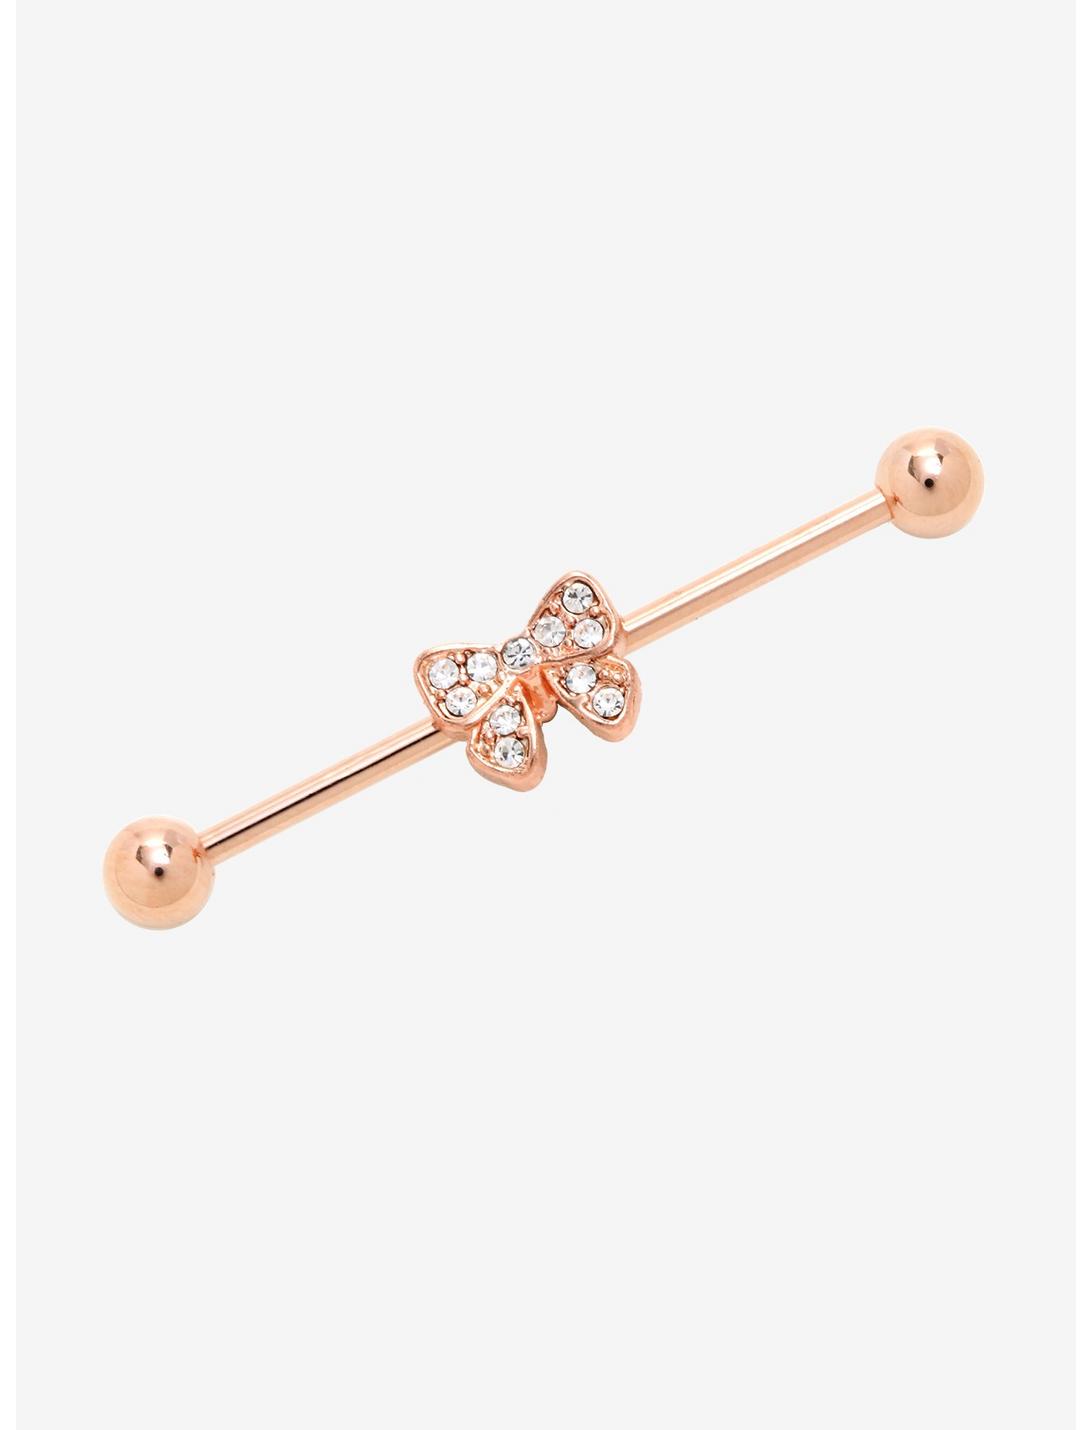 14G 1 1/2" Steel Rose Gold Bow Industrial Barbell, , hi-res